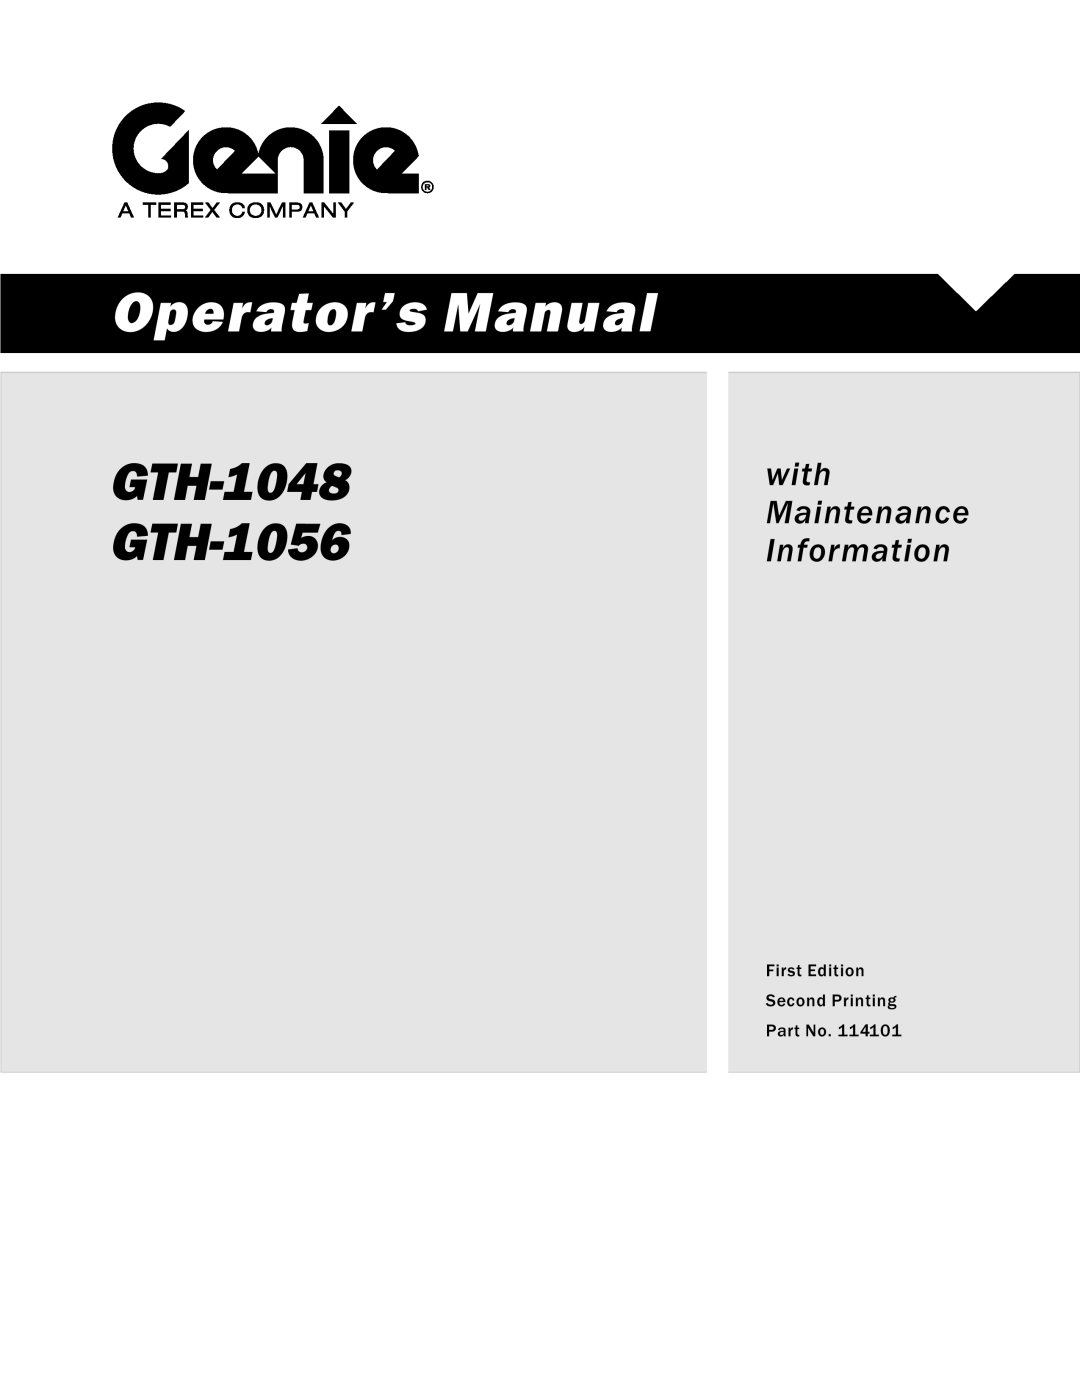 Genie manual Operator’s Manual, GTH-1048 GTH-1056, with Maintenance Information, First Edition Second Printing 